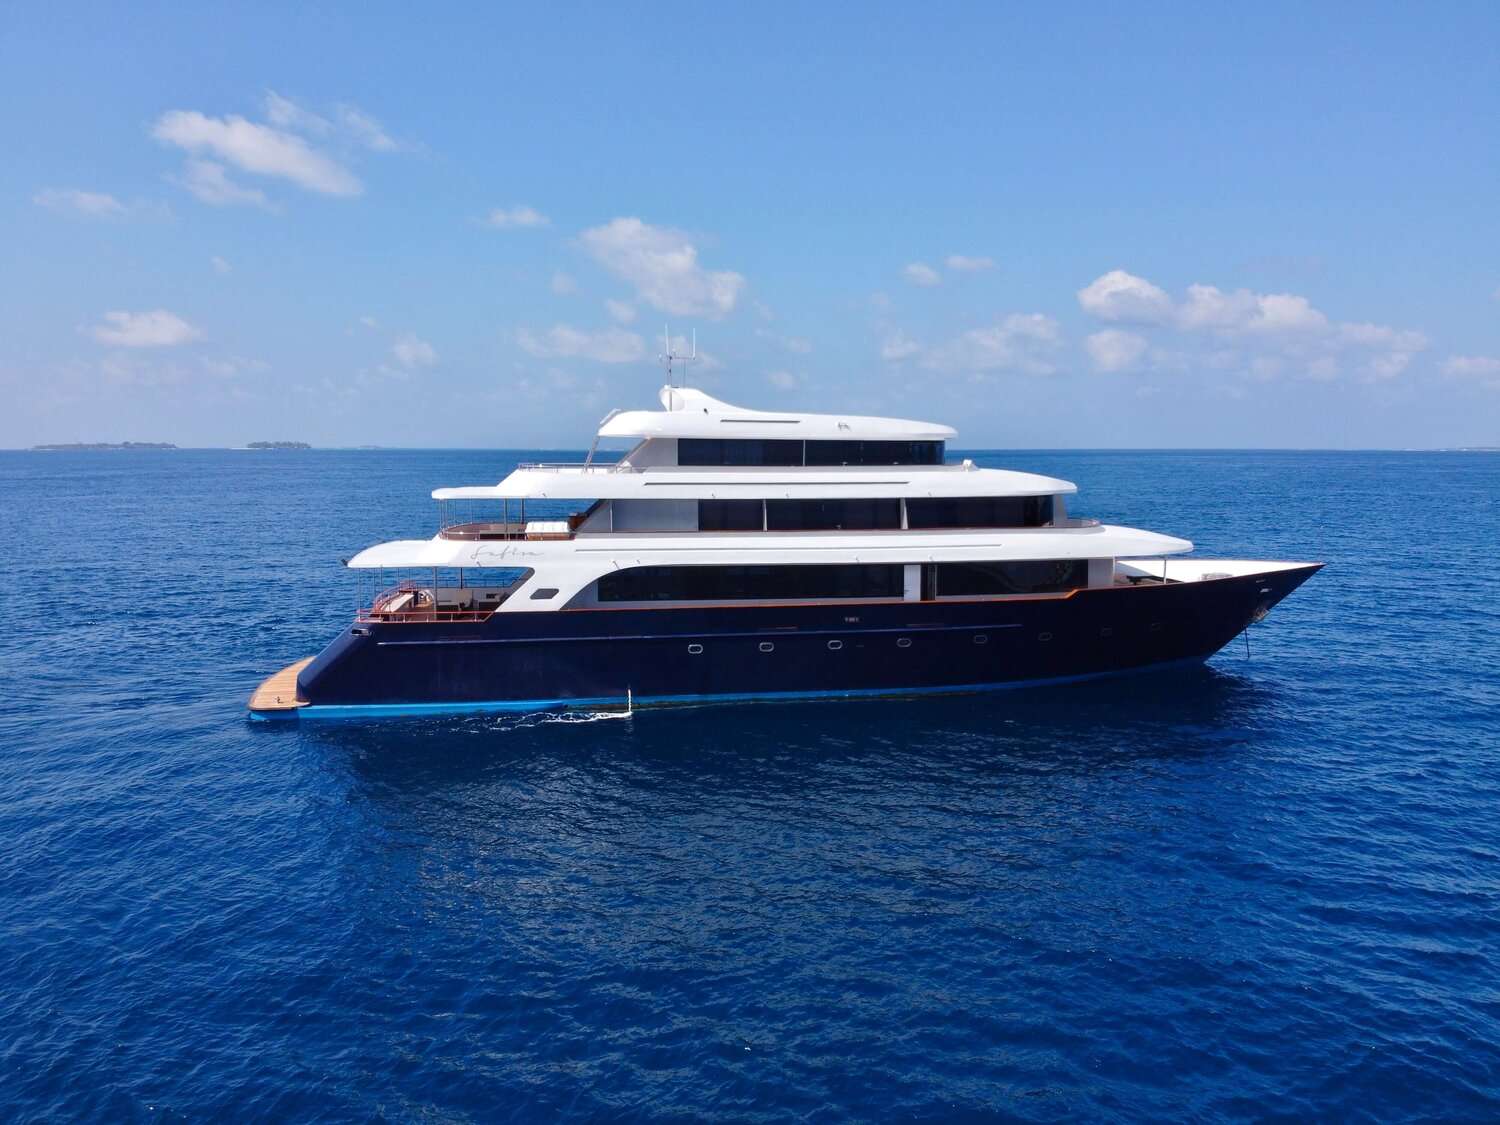 SAFIRA - Superyacht charter Thailand & Boat hire in Indian Ocean & SE Asia 1